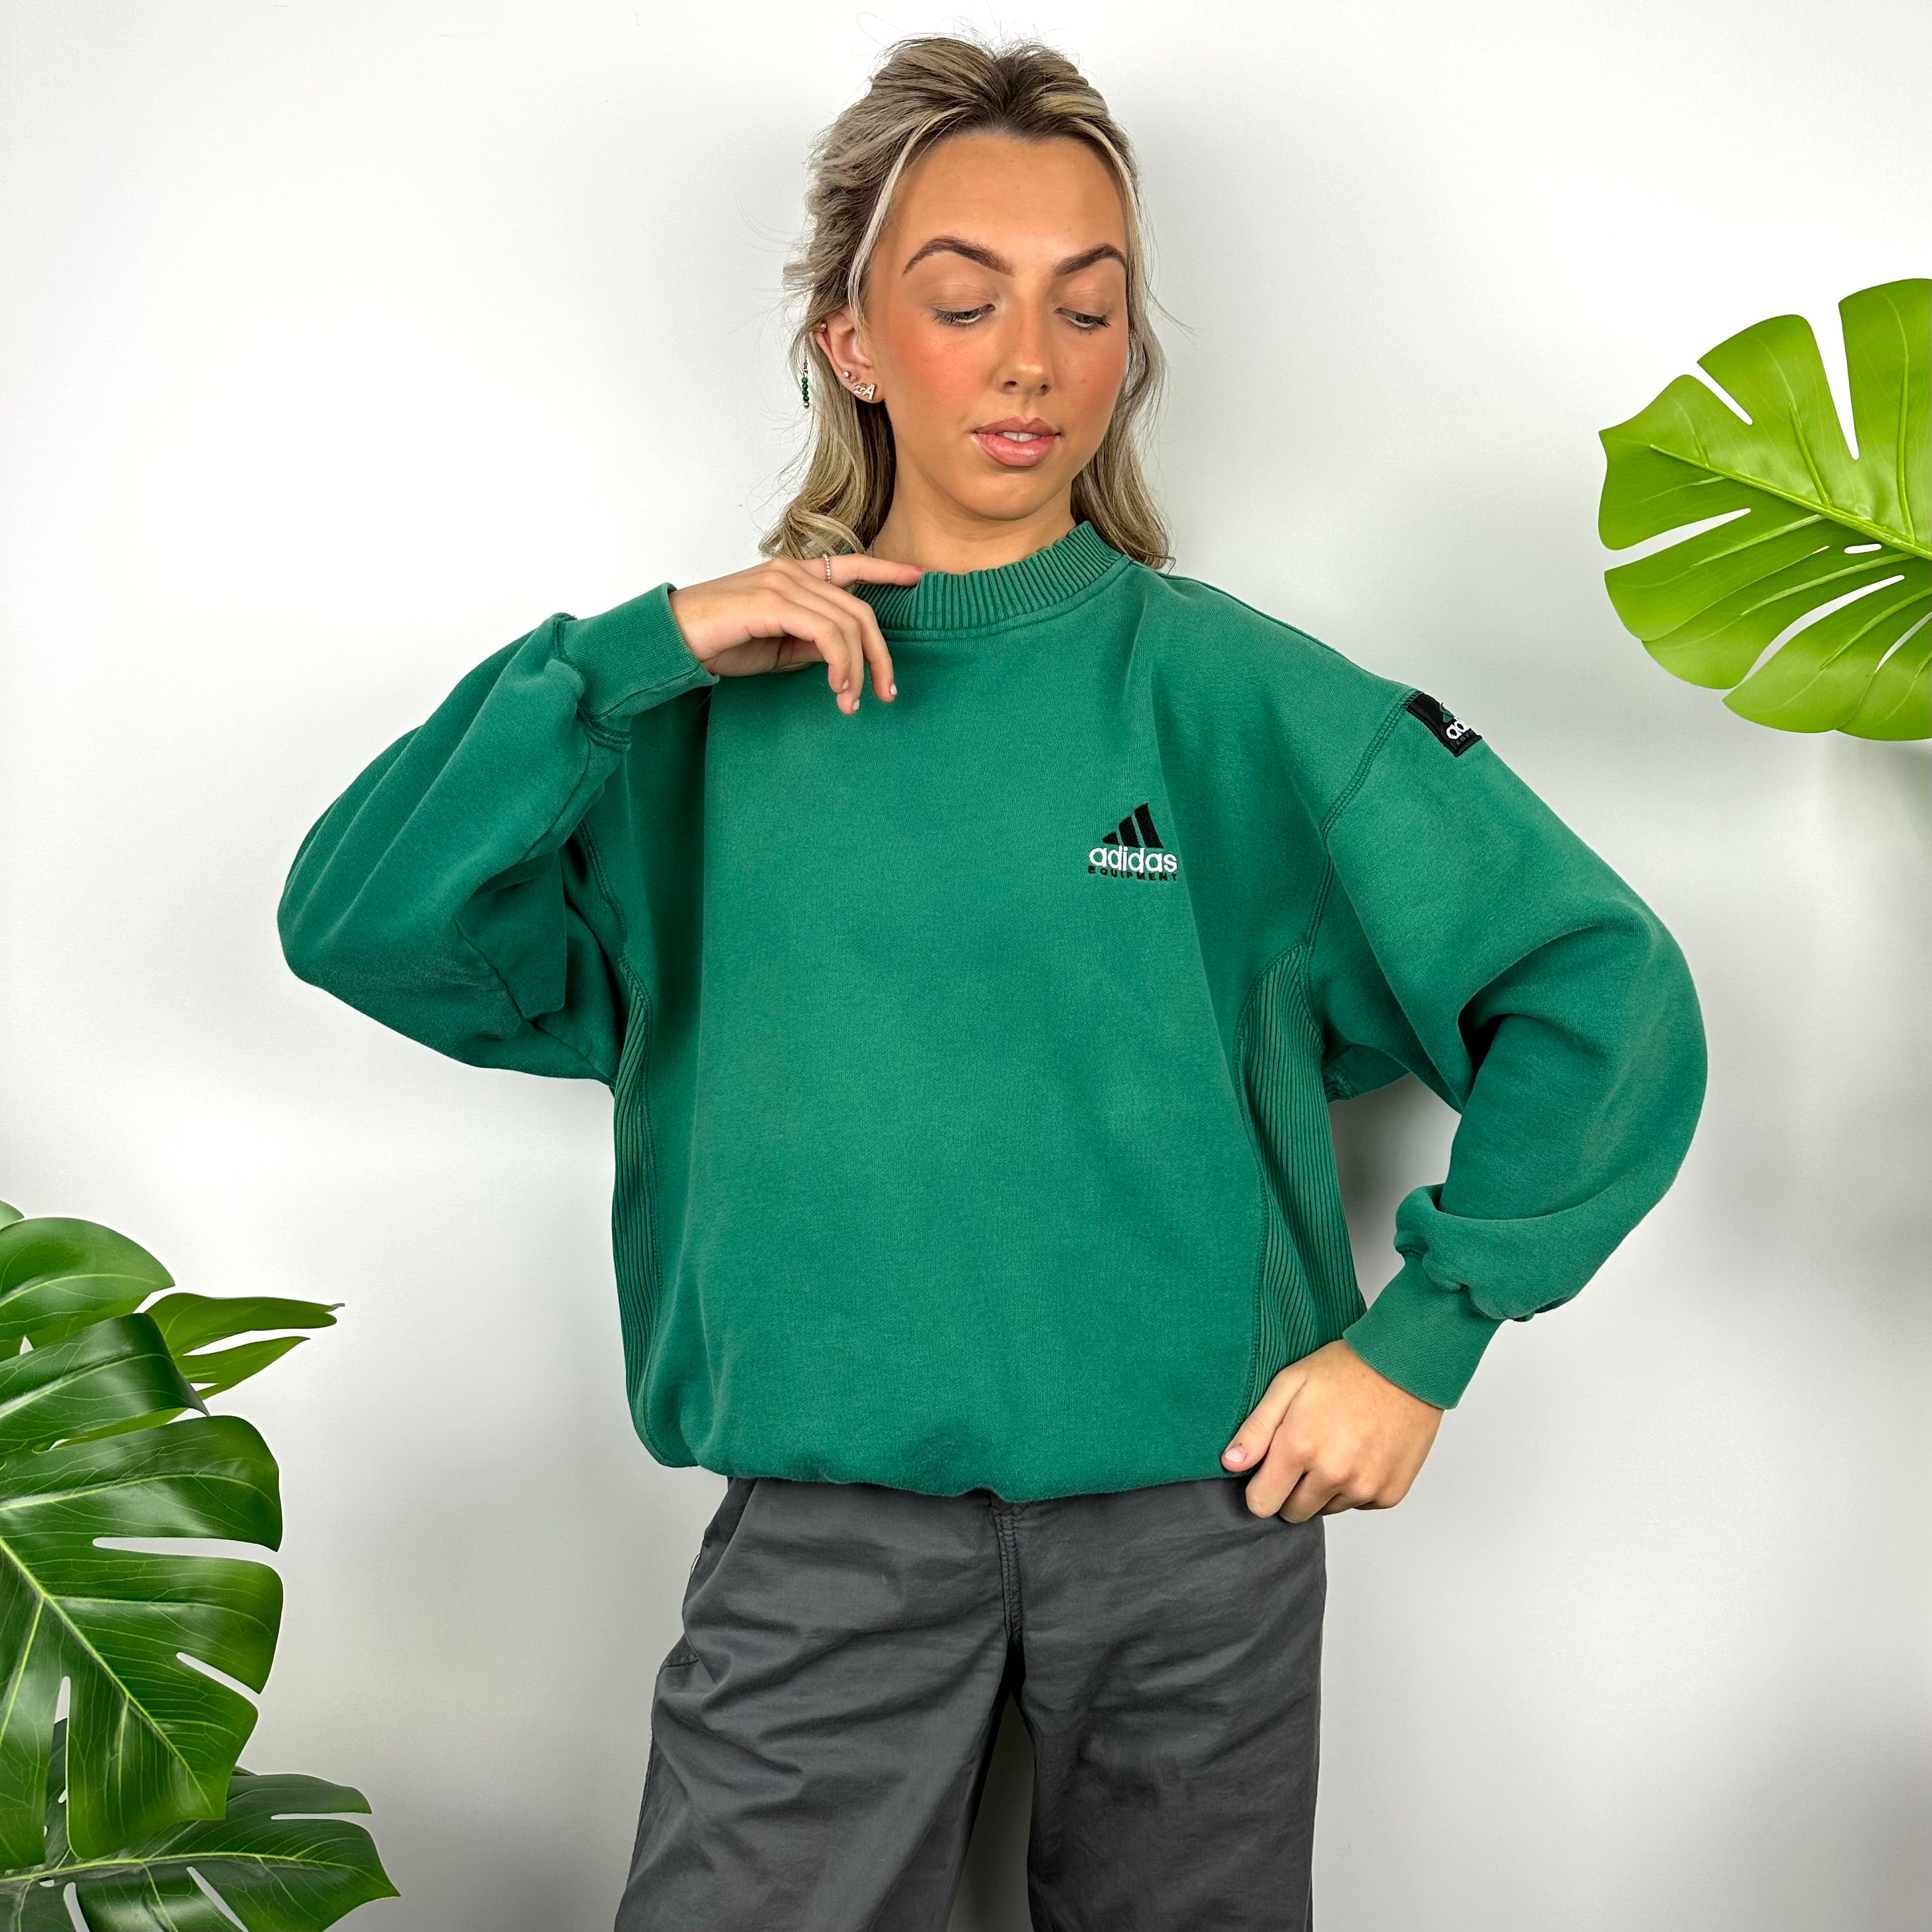 Adidas Equipment RARE Green Embroidered Spell Out Sweatshirt (L)